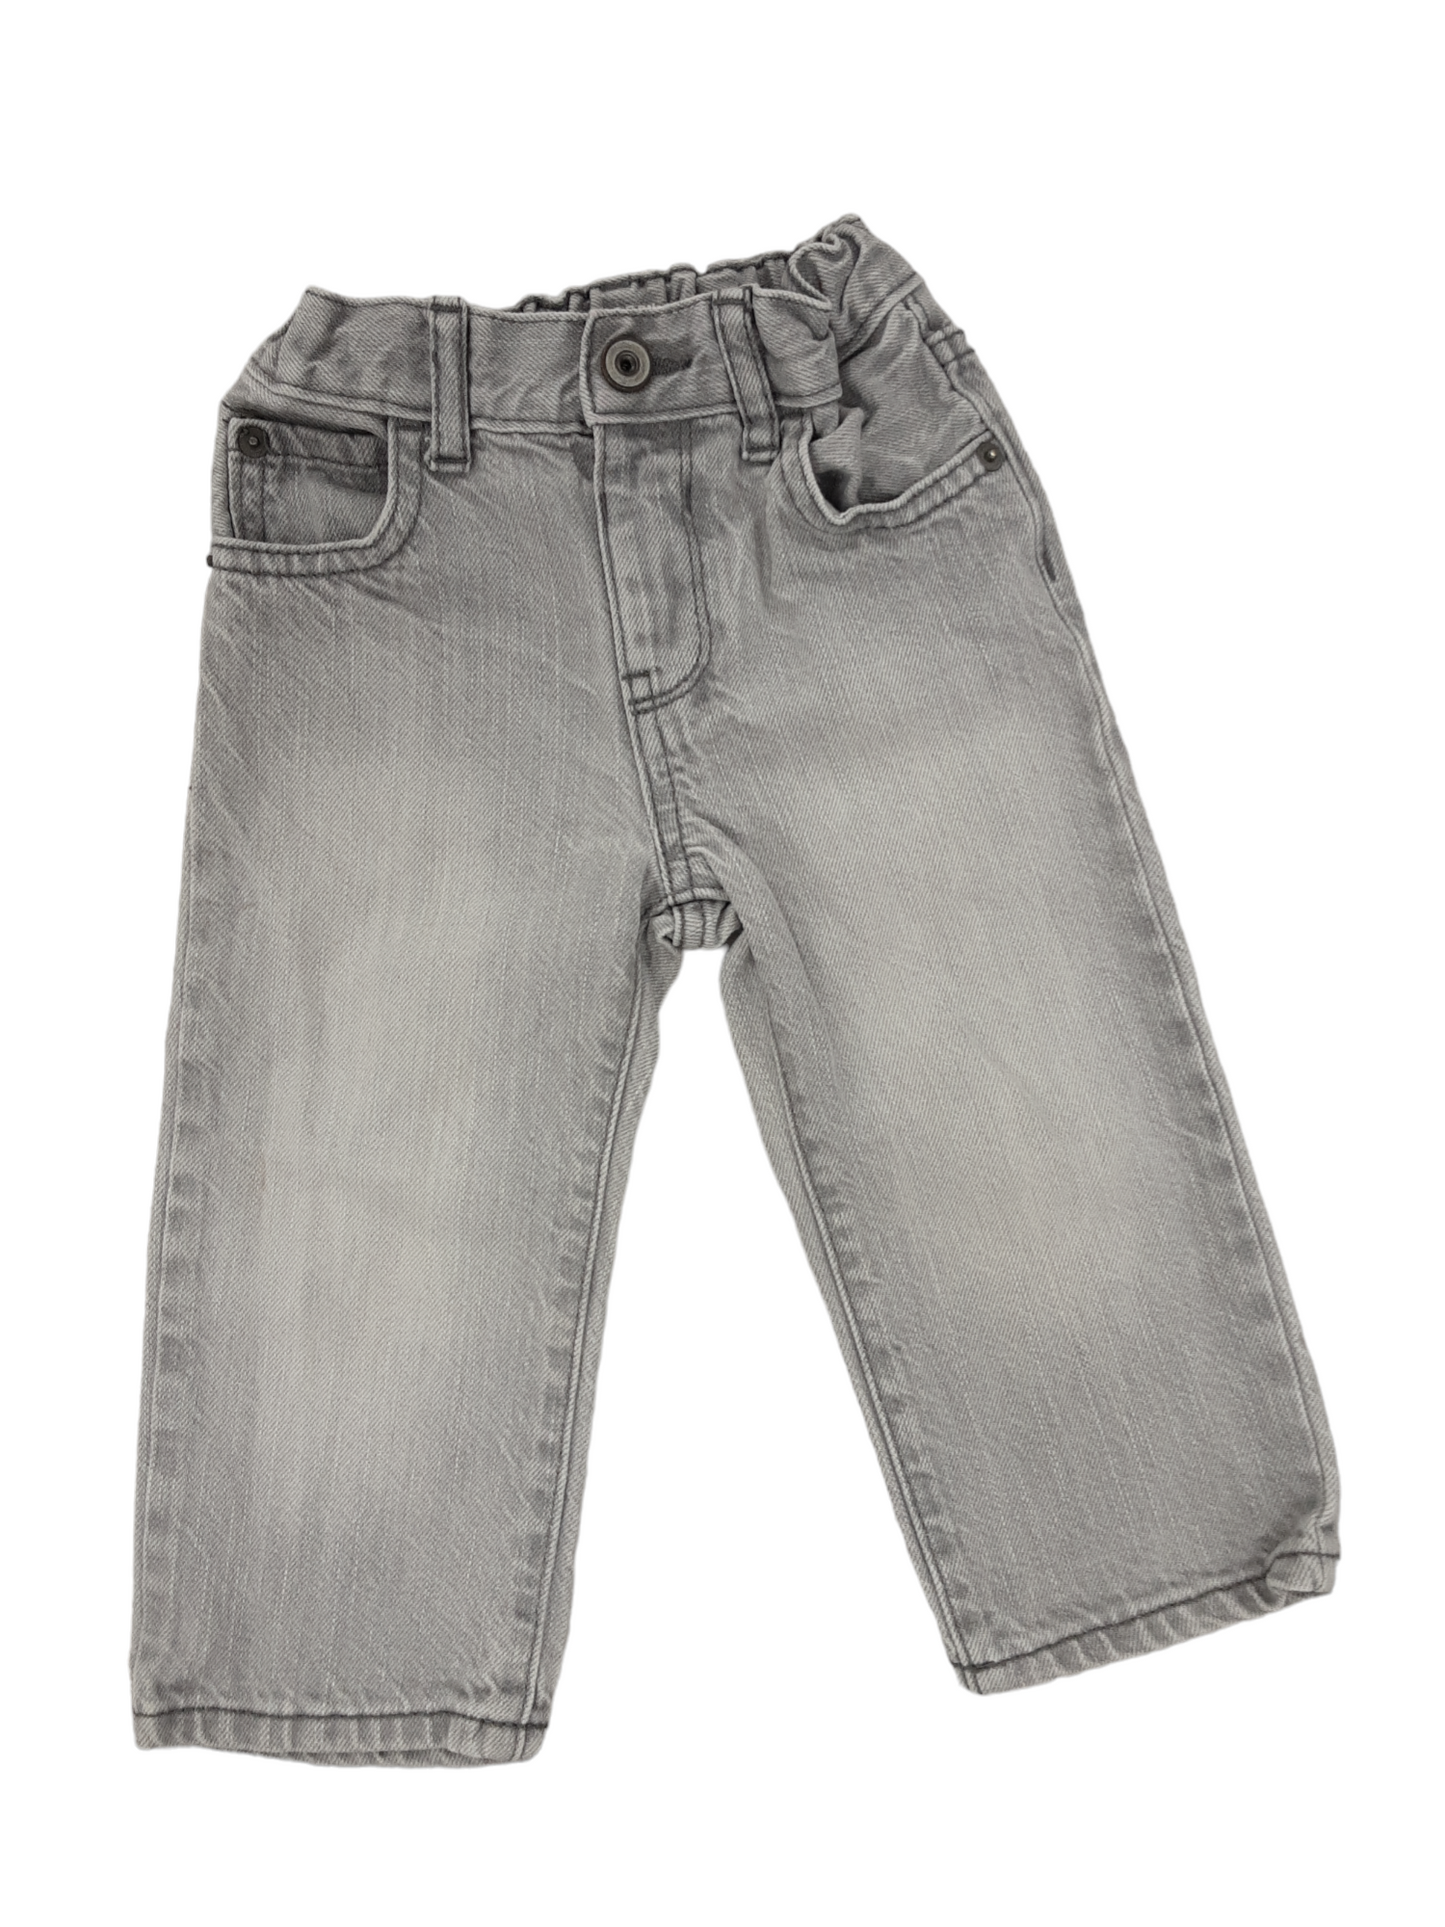 Grey jeans size 18 to 24 months